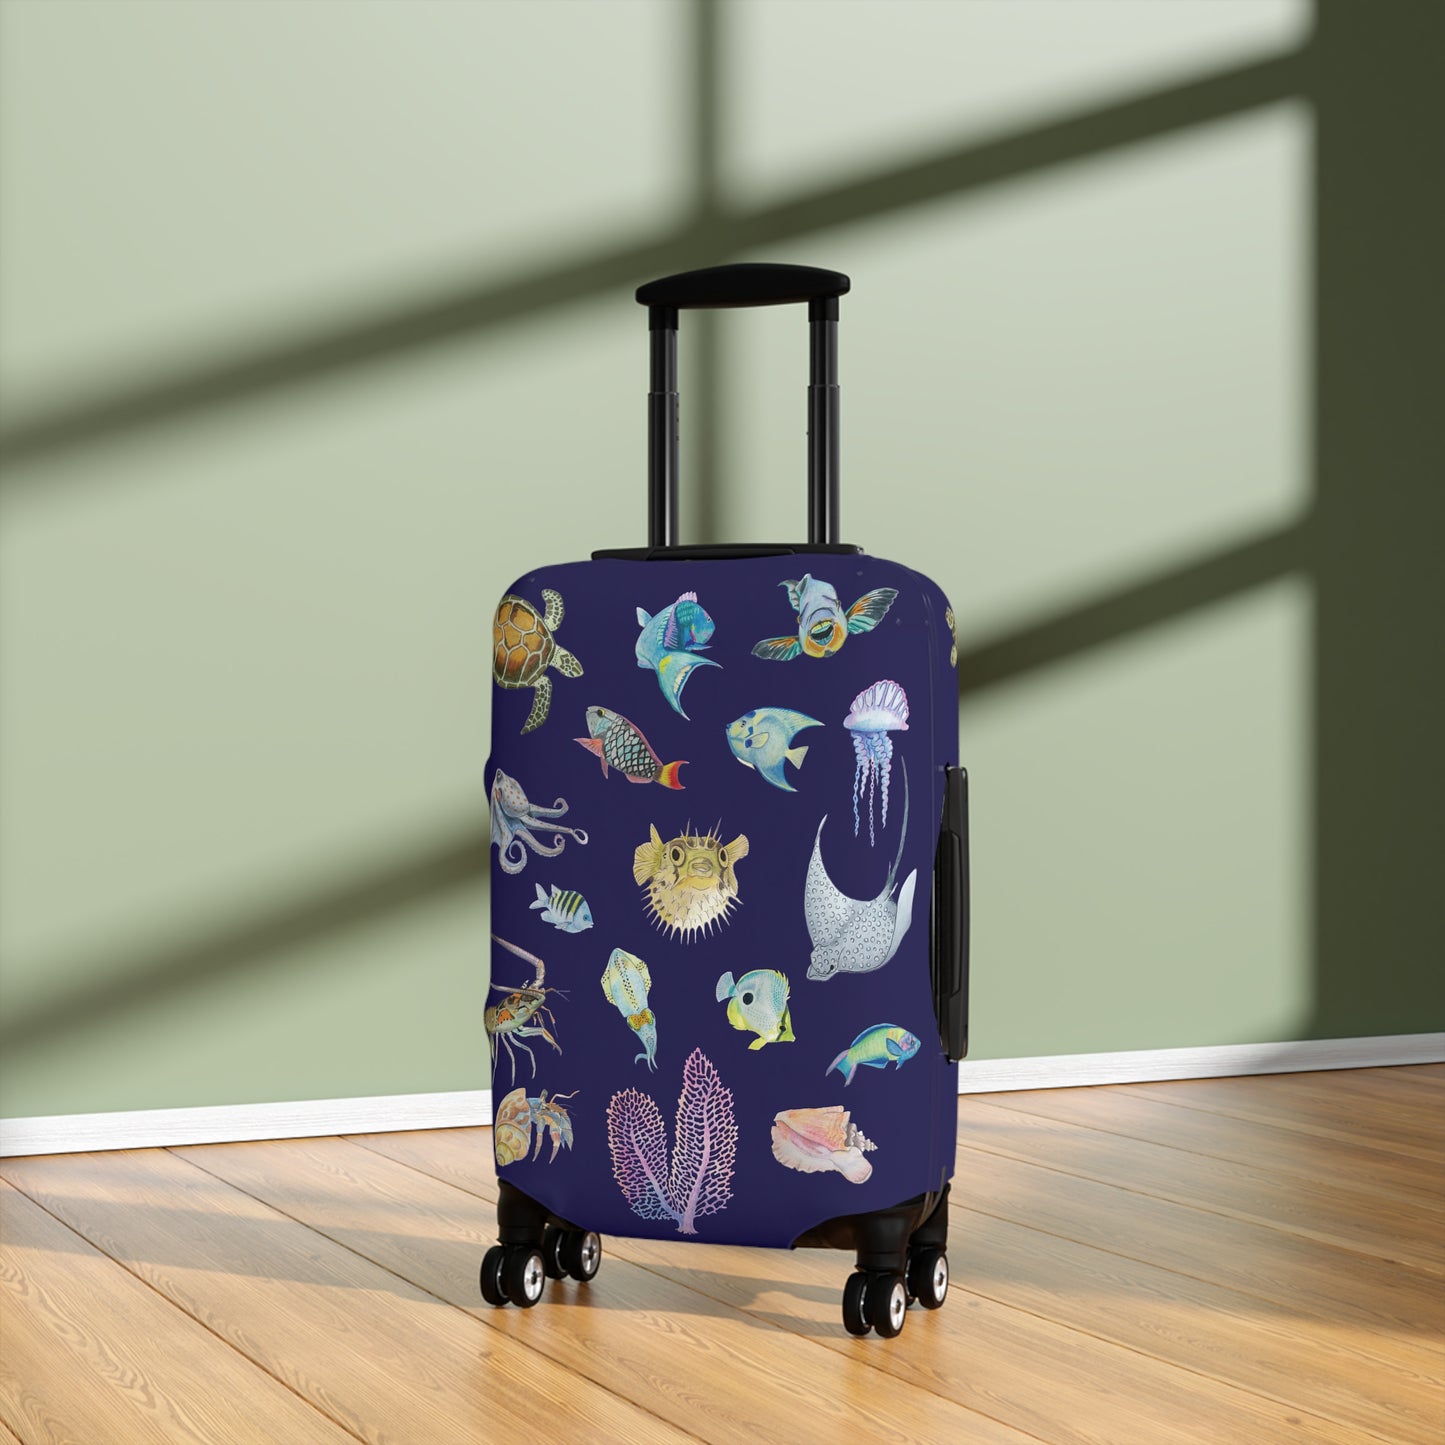 Sargasso Sea - Luggage Cover - Midnight